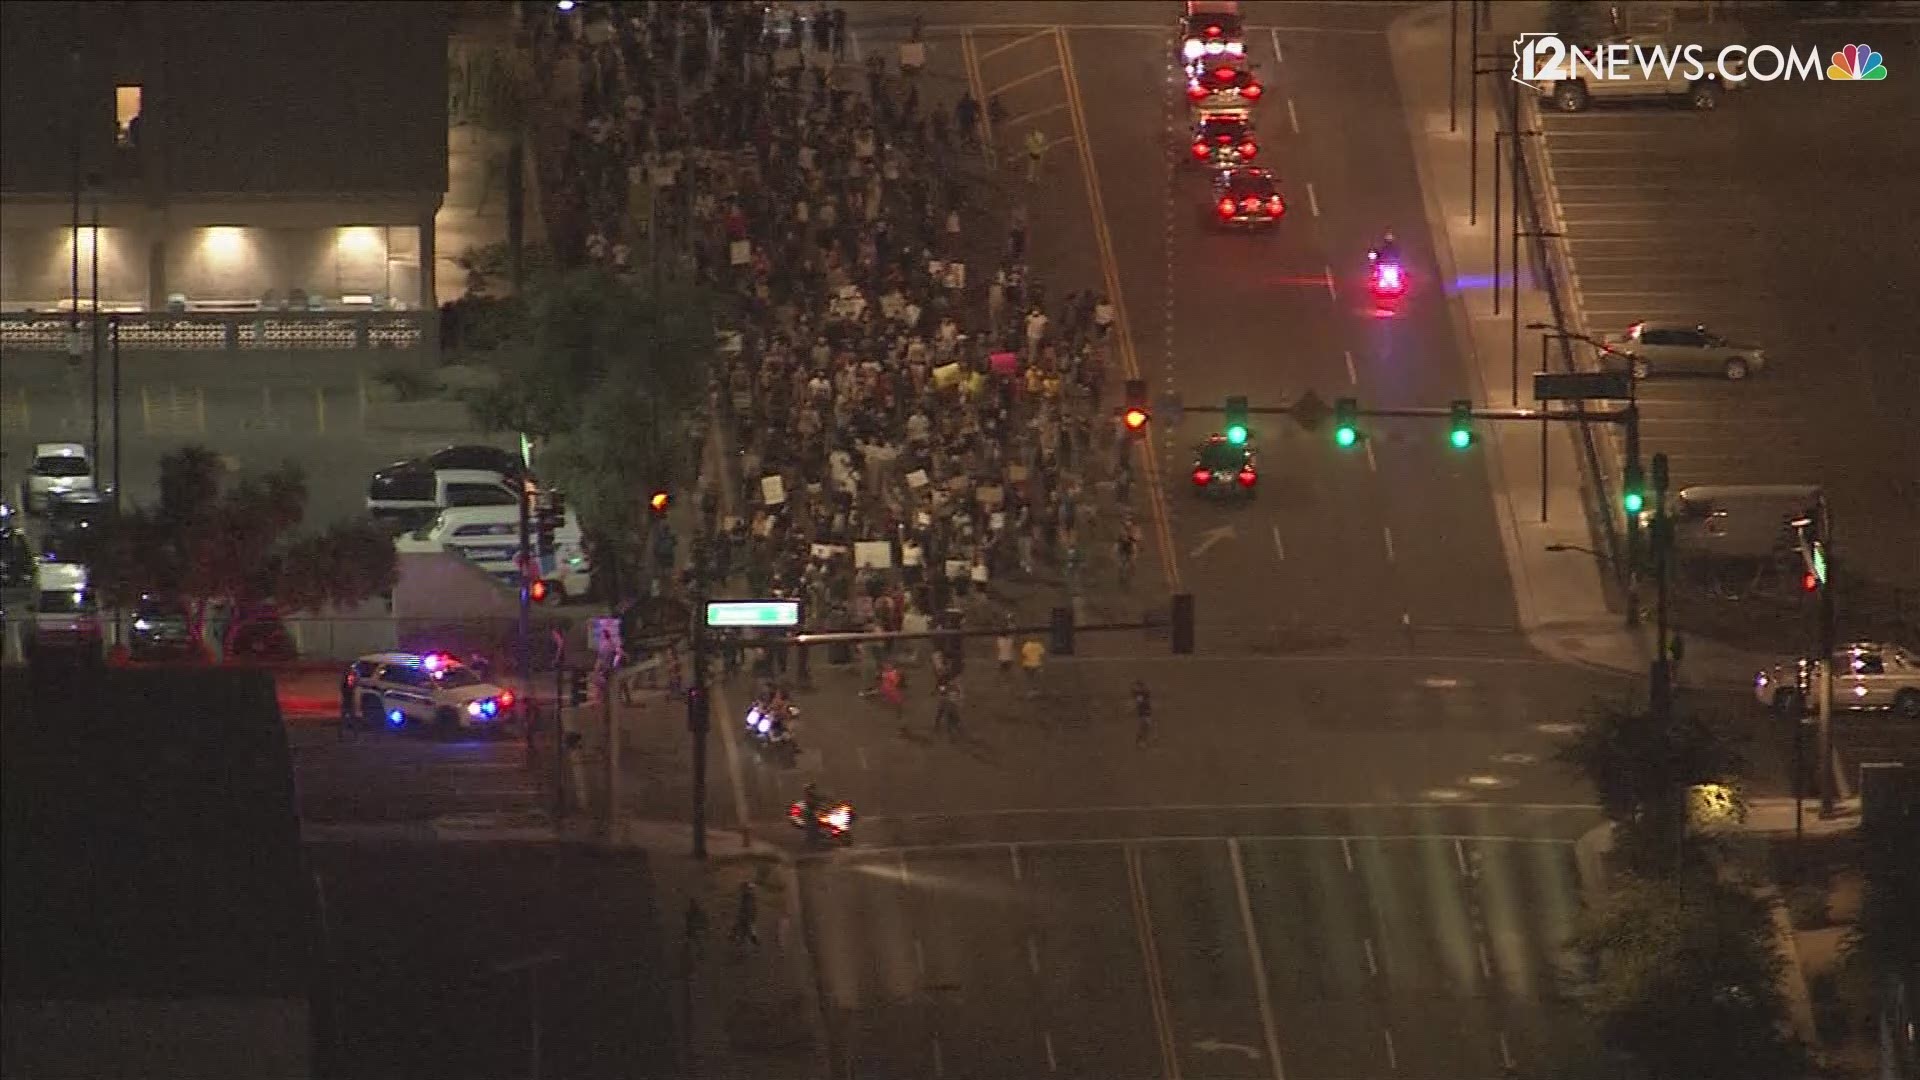 Protestors took to the streets of downtown Phoenix for a third night in a row to protest the killing of George Floyd. The protestors gathered in front of Phoenix PD.